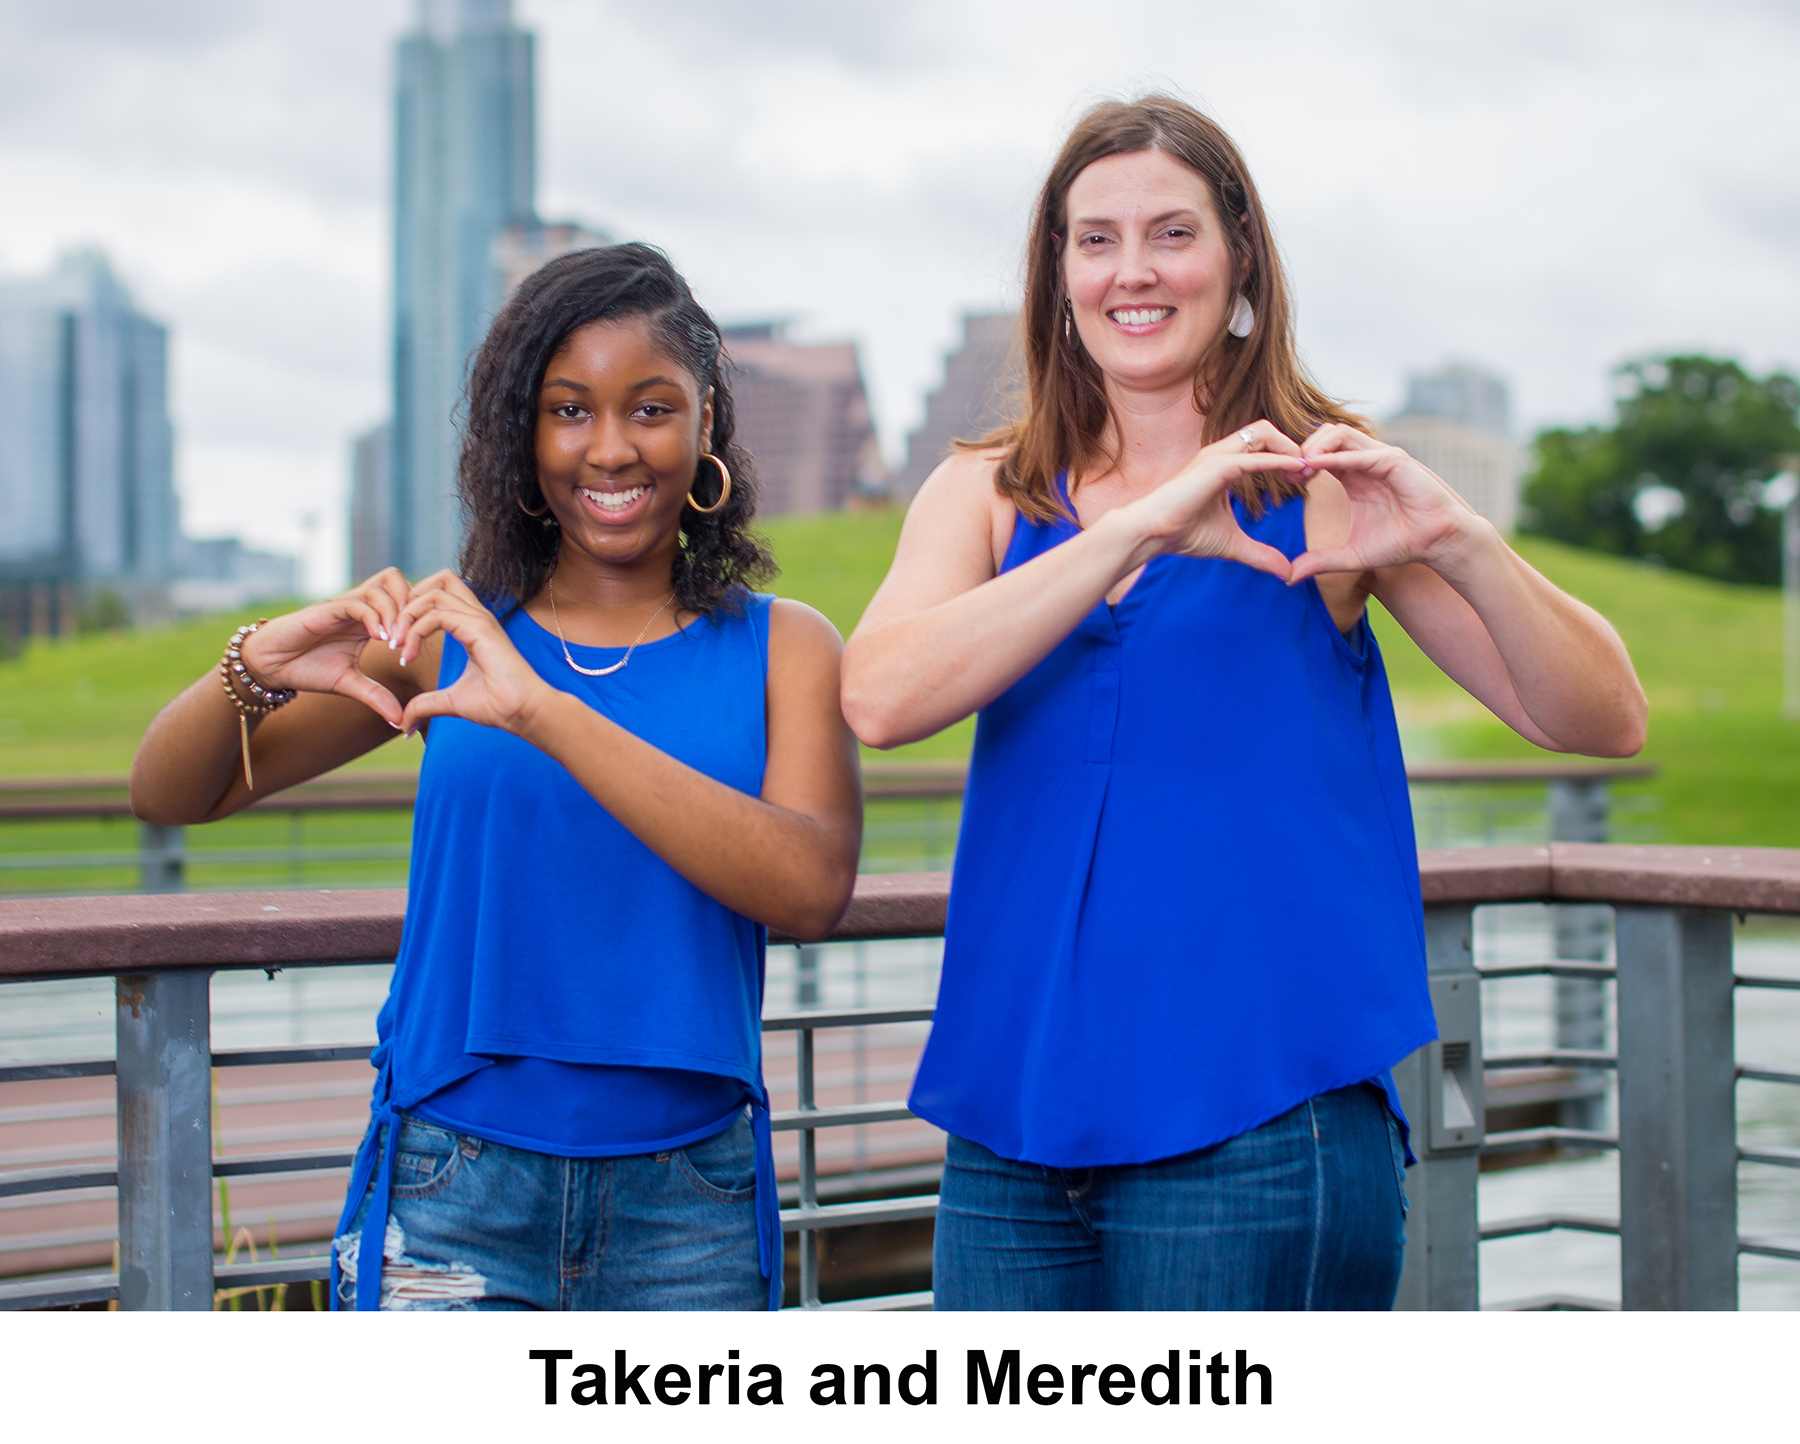 takeria-and-meredith-lm-046-copy